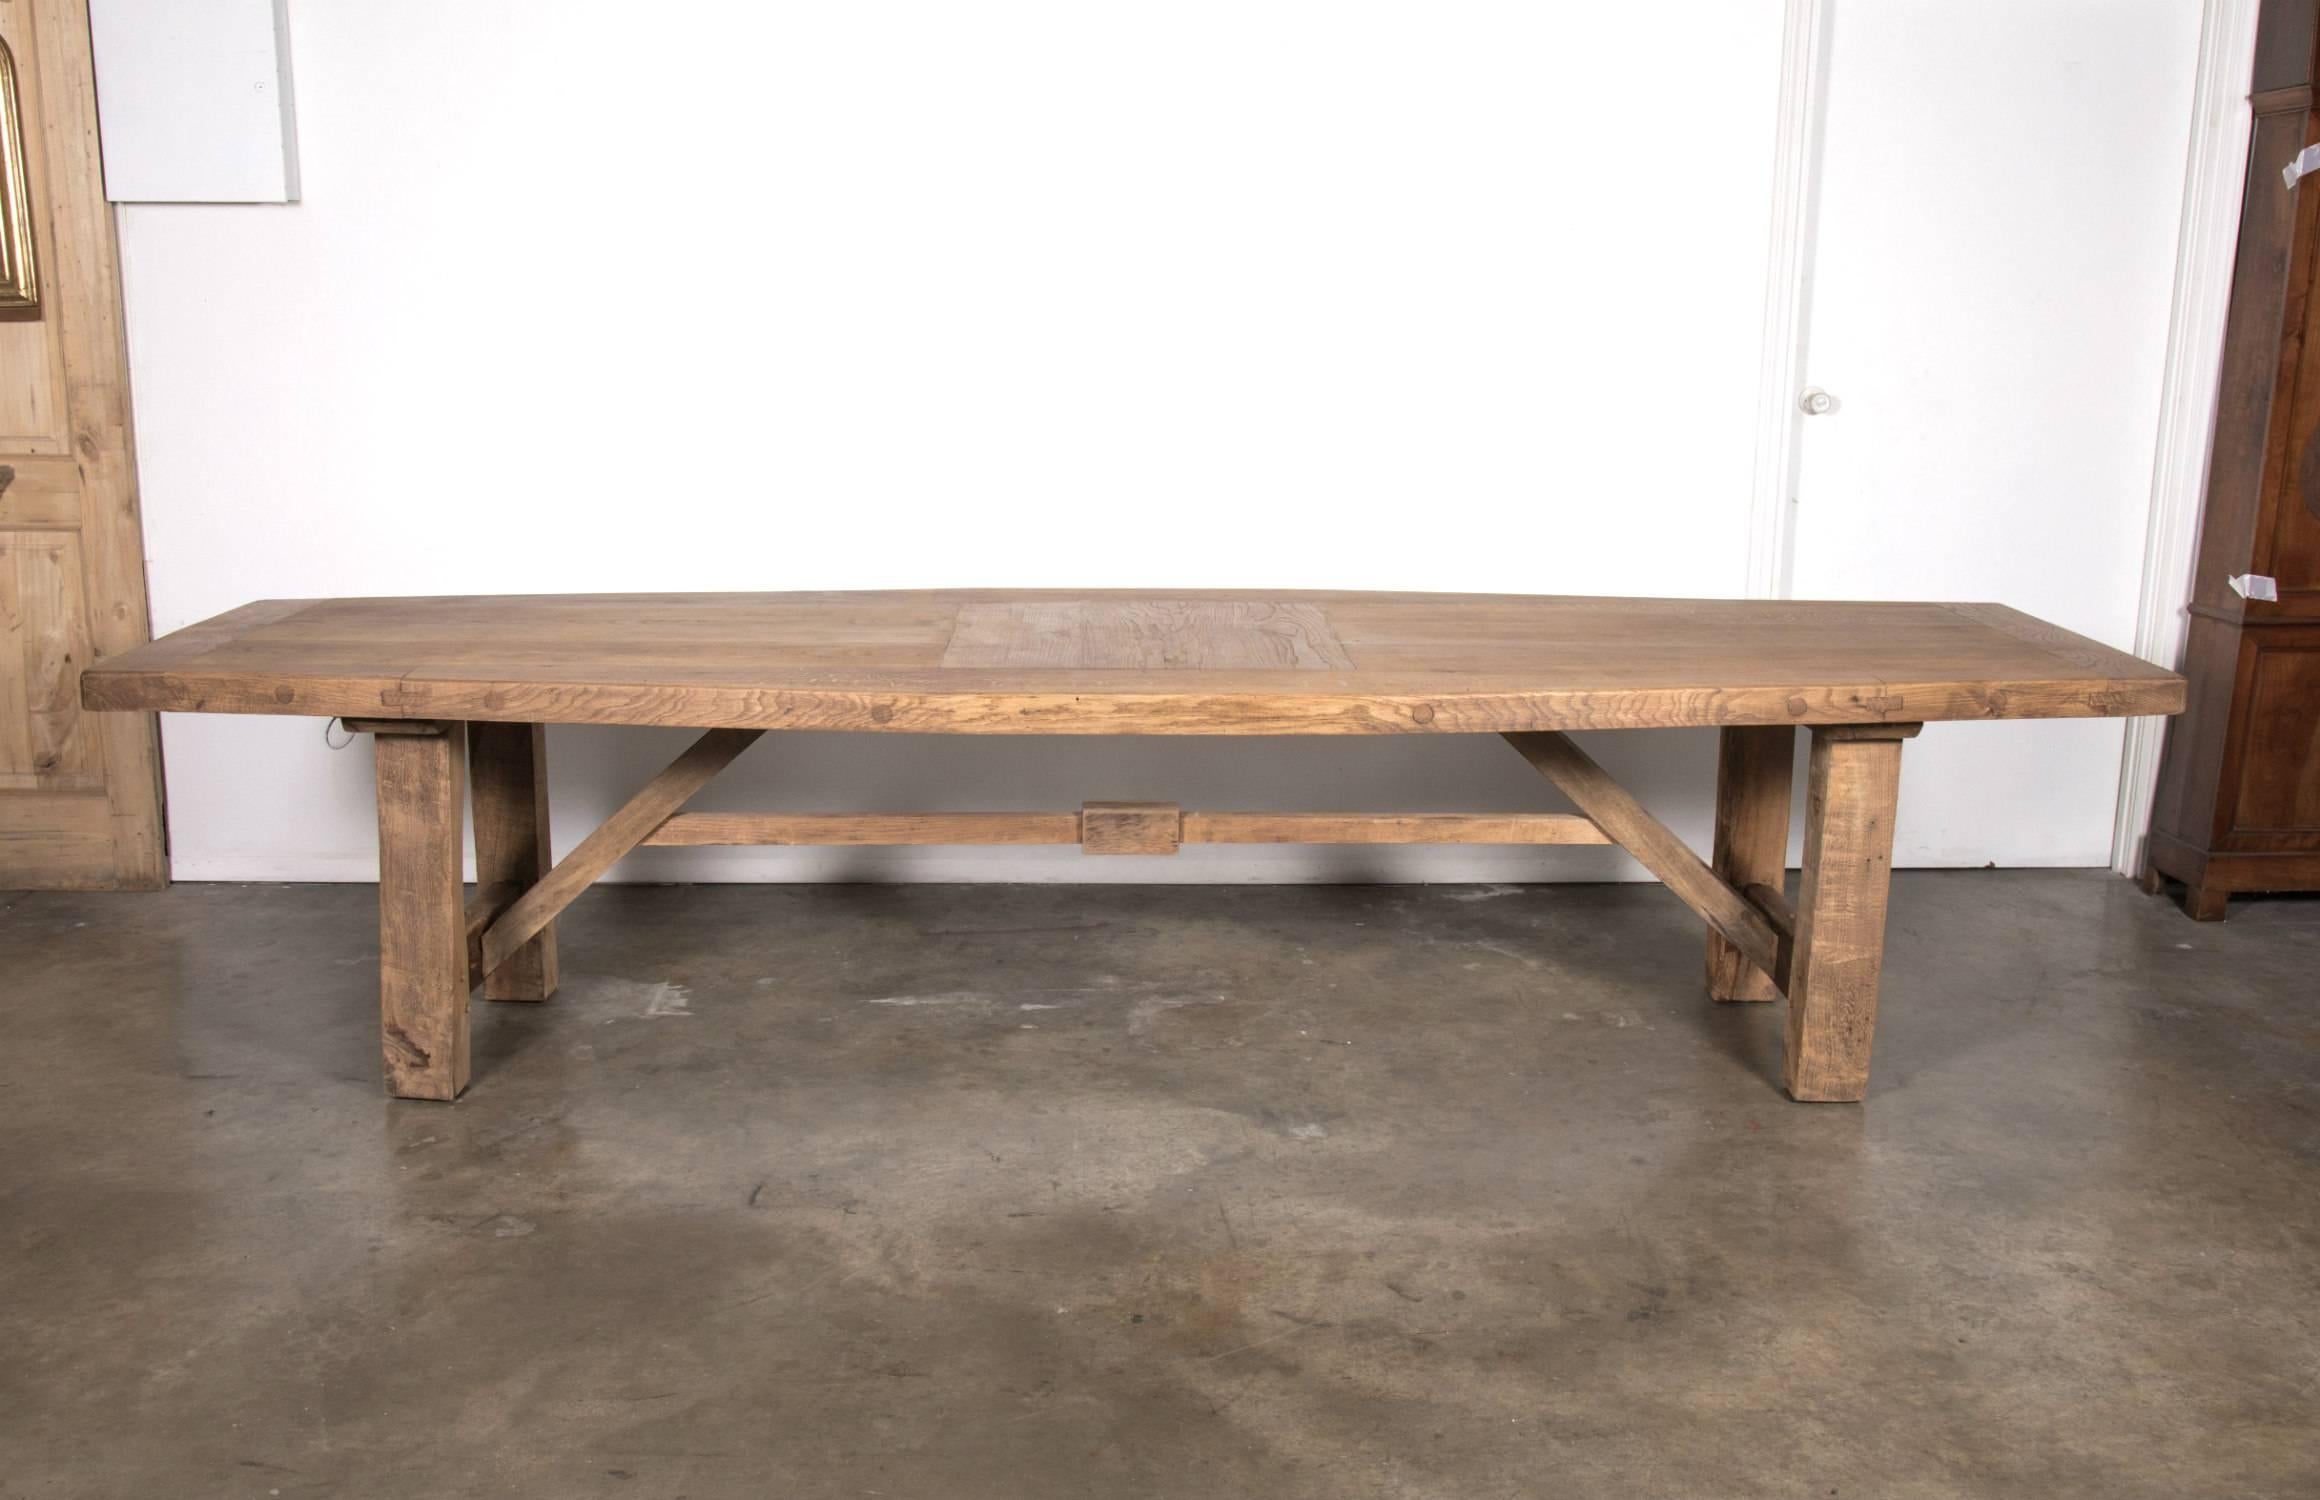 A very large bleached or washed oak French farm table handcrafted by rural artisans near the seaside resort of La Baule in southern Brittany. This wonderful 19th century French farm house trestle table is of superior quality to any modern table,